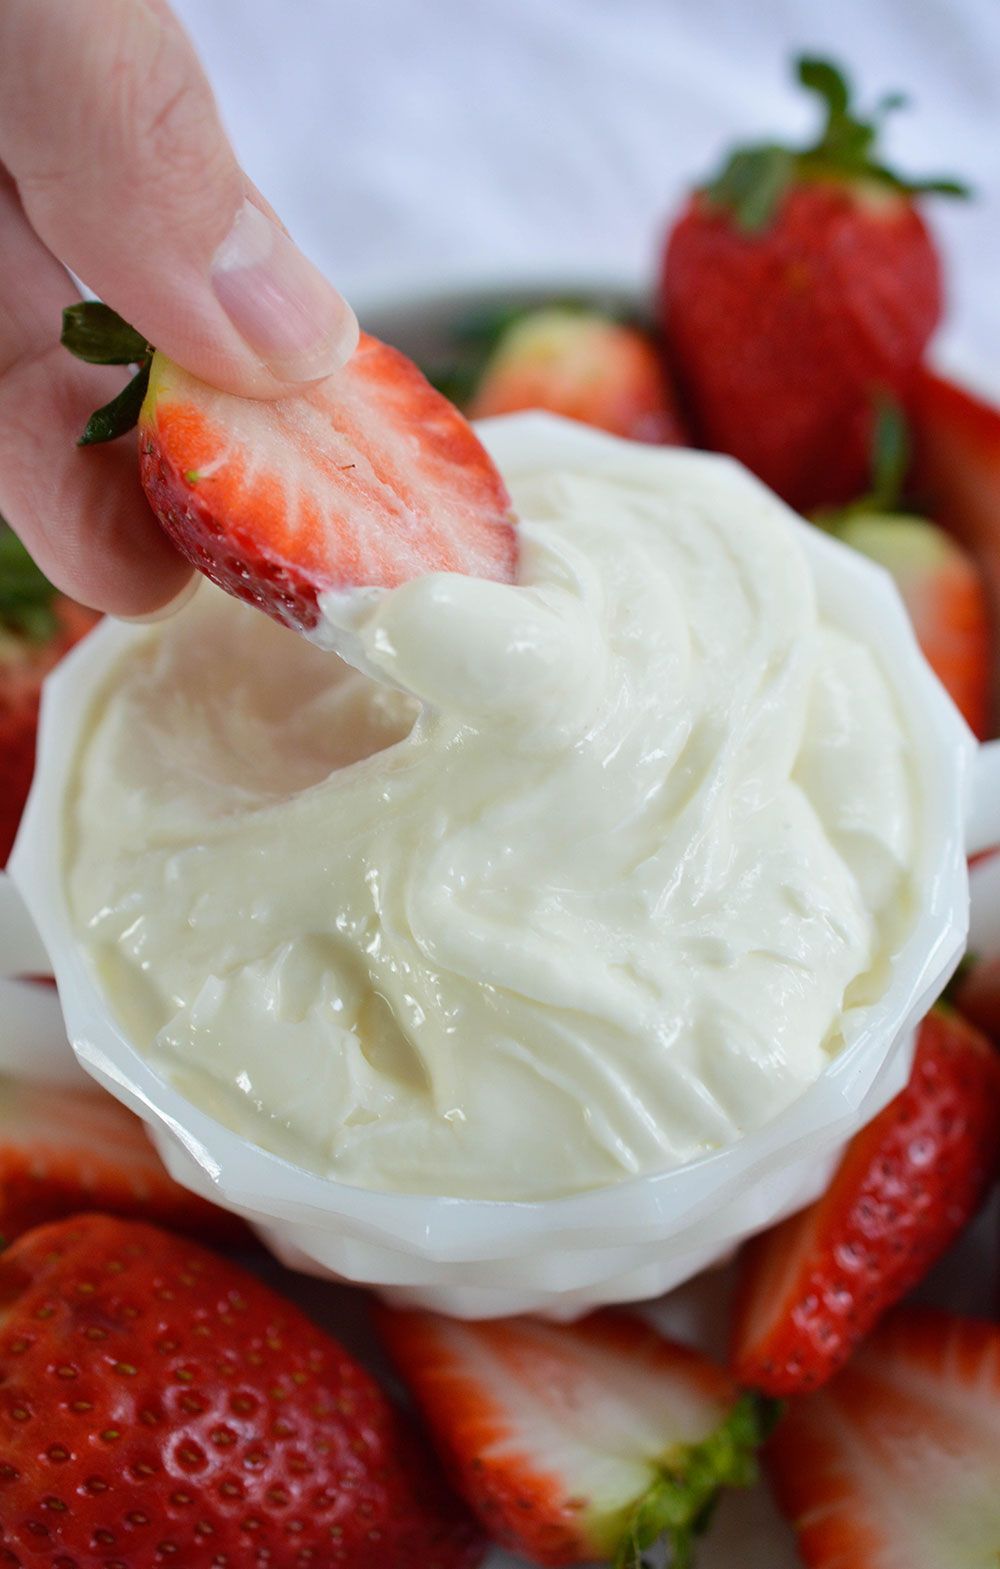 Marshmallow Fluff Fruit Dip – This easy dip recipe is made with 3 ingredients! Marshmallow Fluff, Cream Cheese and White